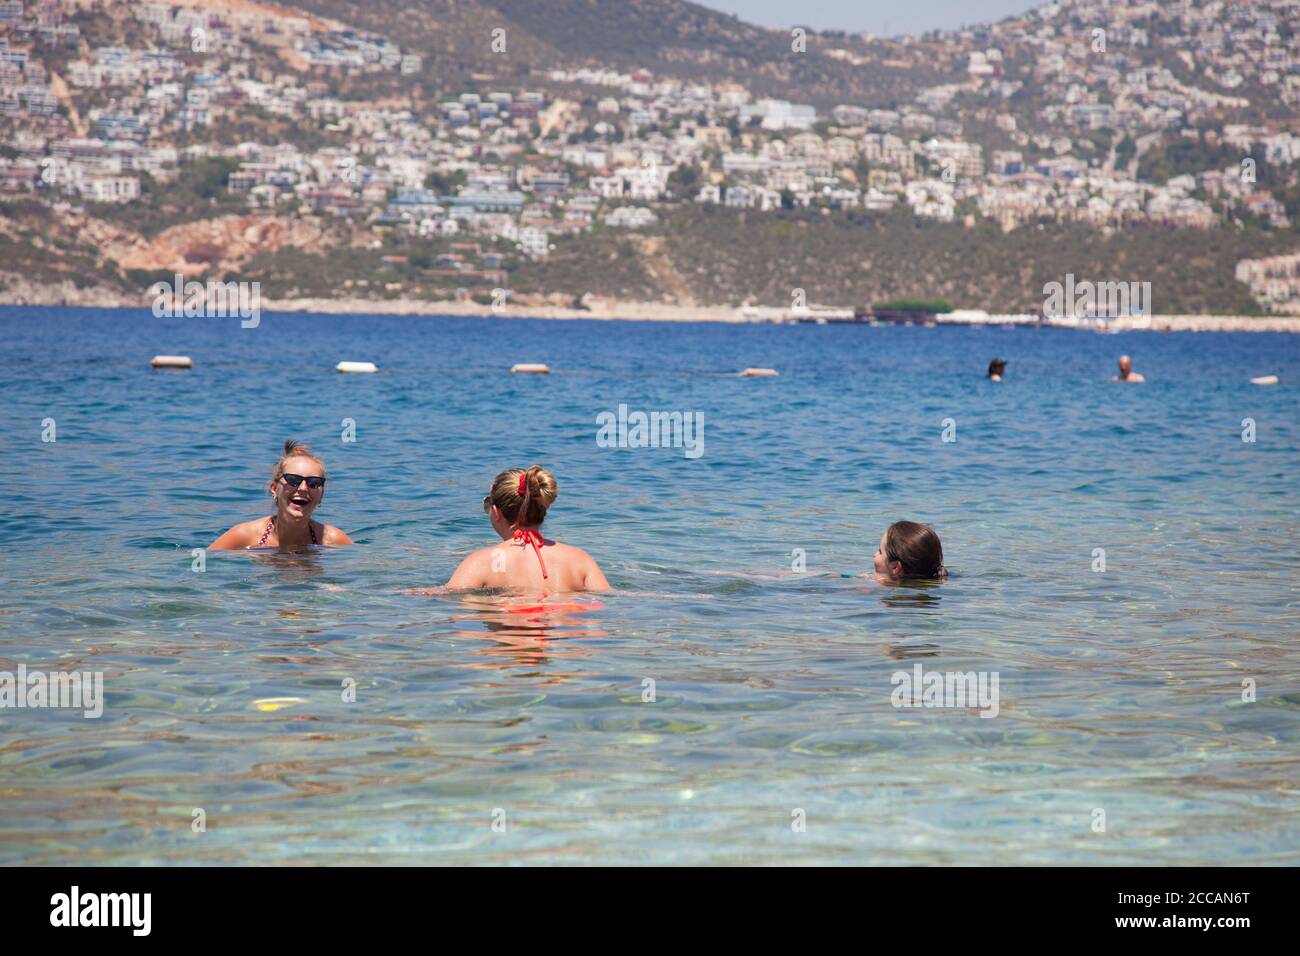 Young women ( model released ) in the sea at the Kalkan beach club with the town of Kalkan in the bacground. Kalkan is a popular holiday destination a Stock Photo